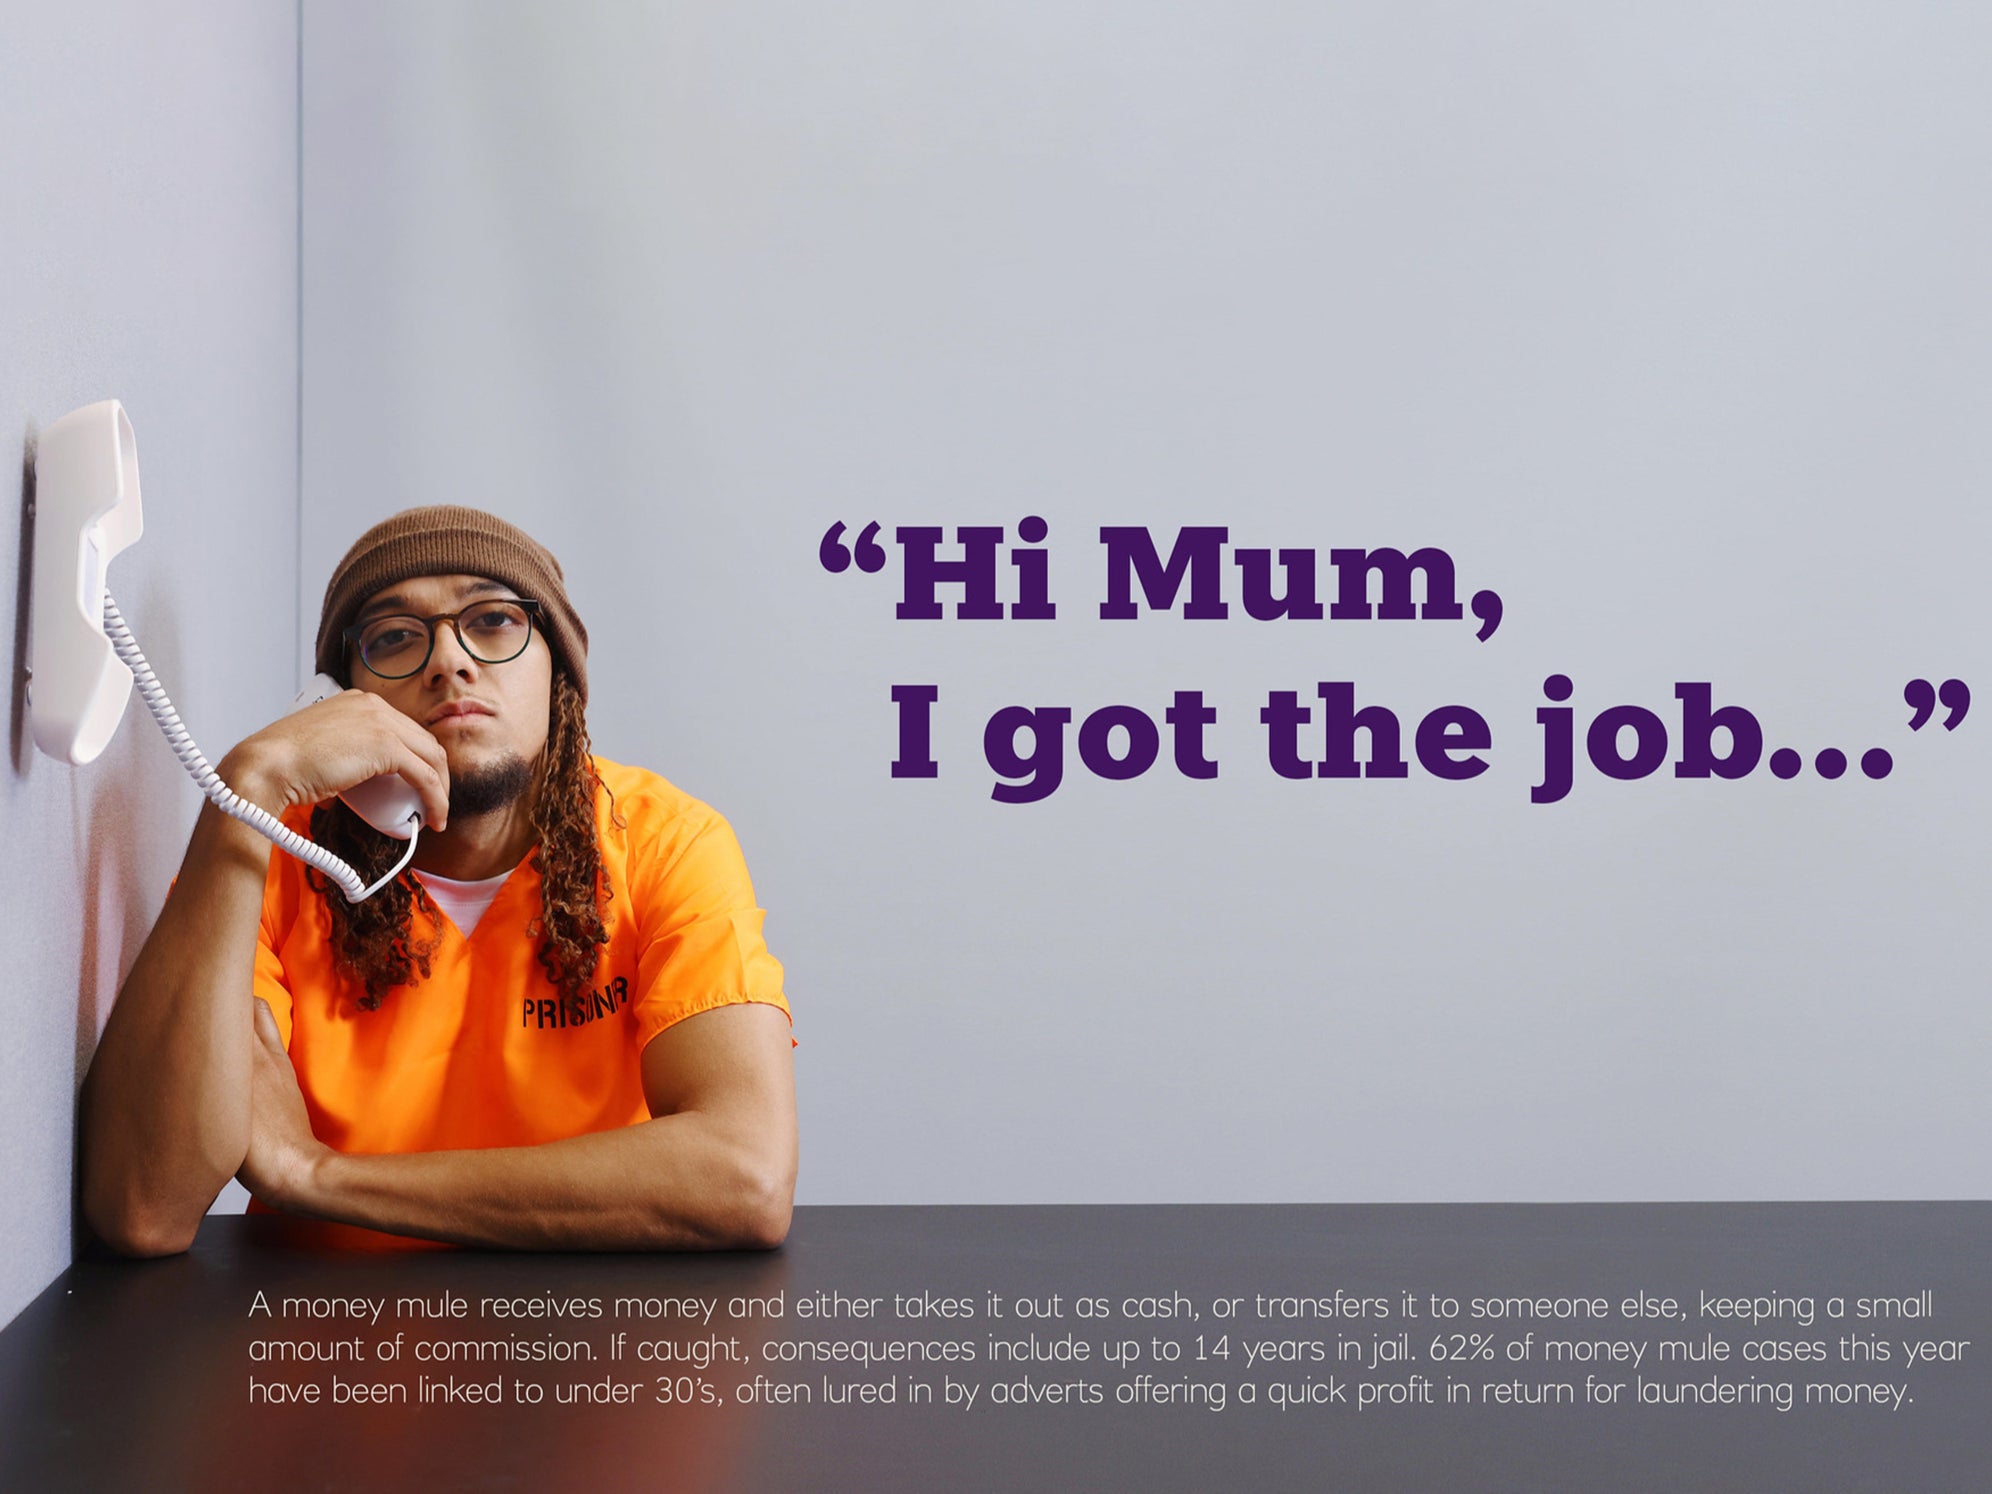 Perri Kiely is raising awareness of money muling in a new NatWest campaign